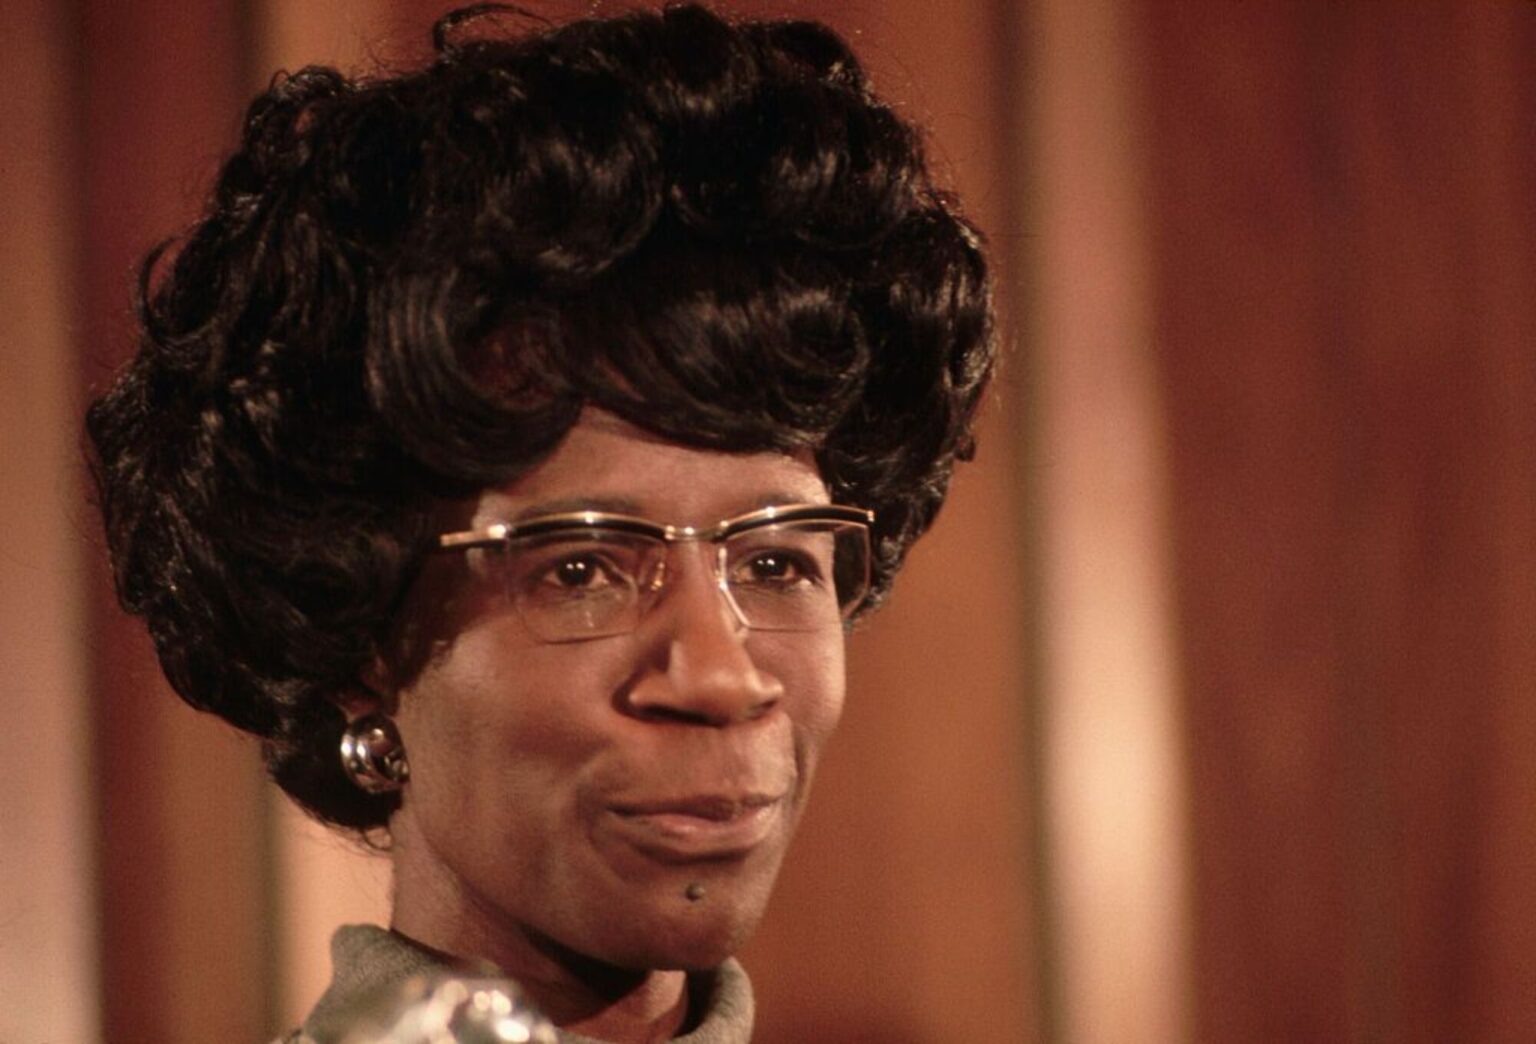 Happy International Women's Day! Do you want to celebrate with a legendary politician? Here's the most inspirational quotes by Shirley Chisholm